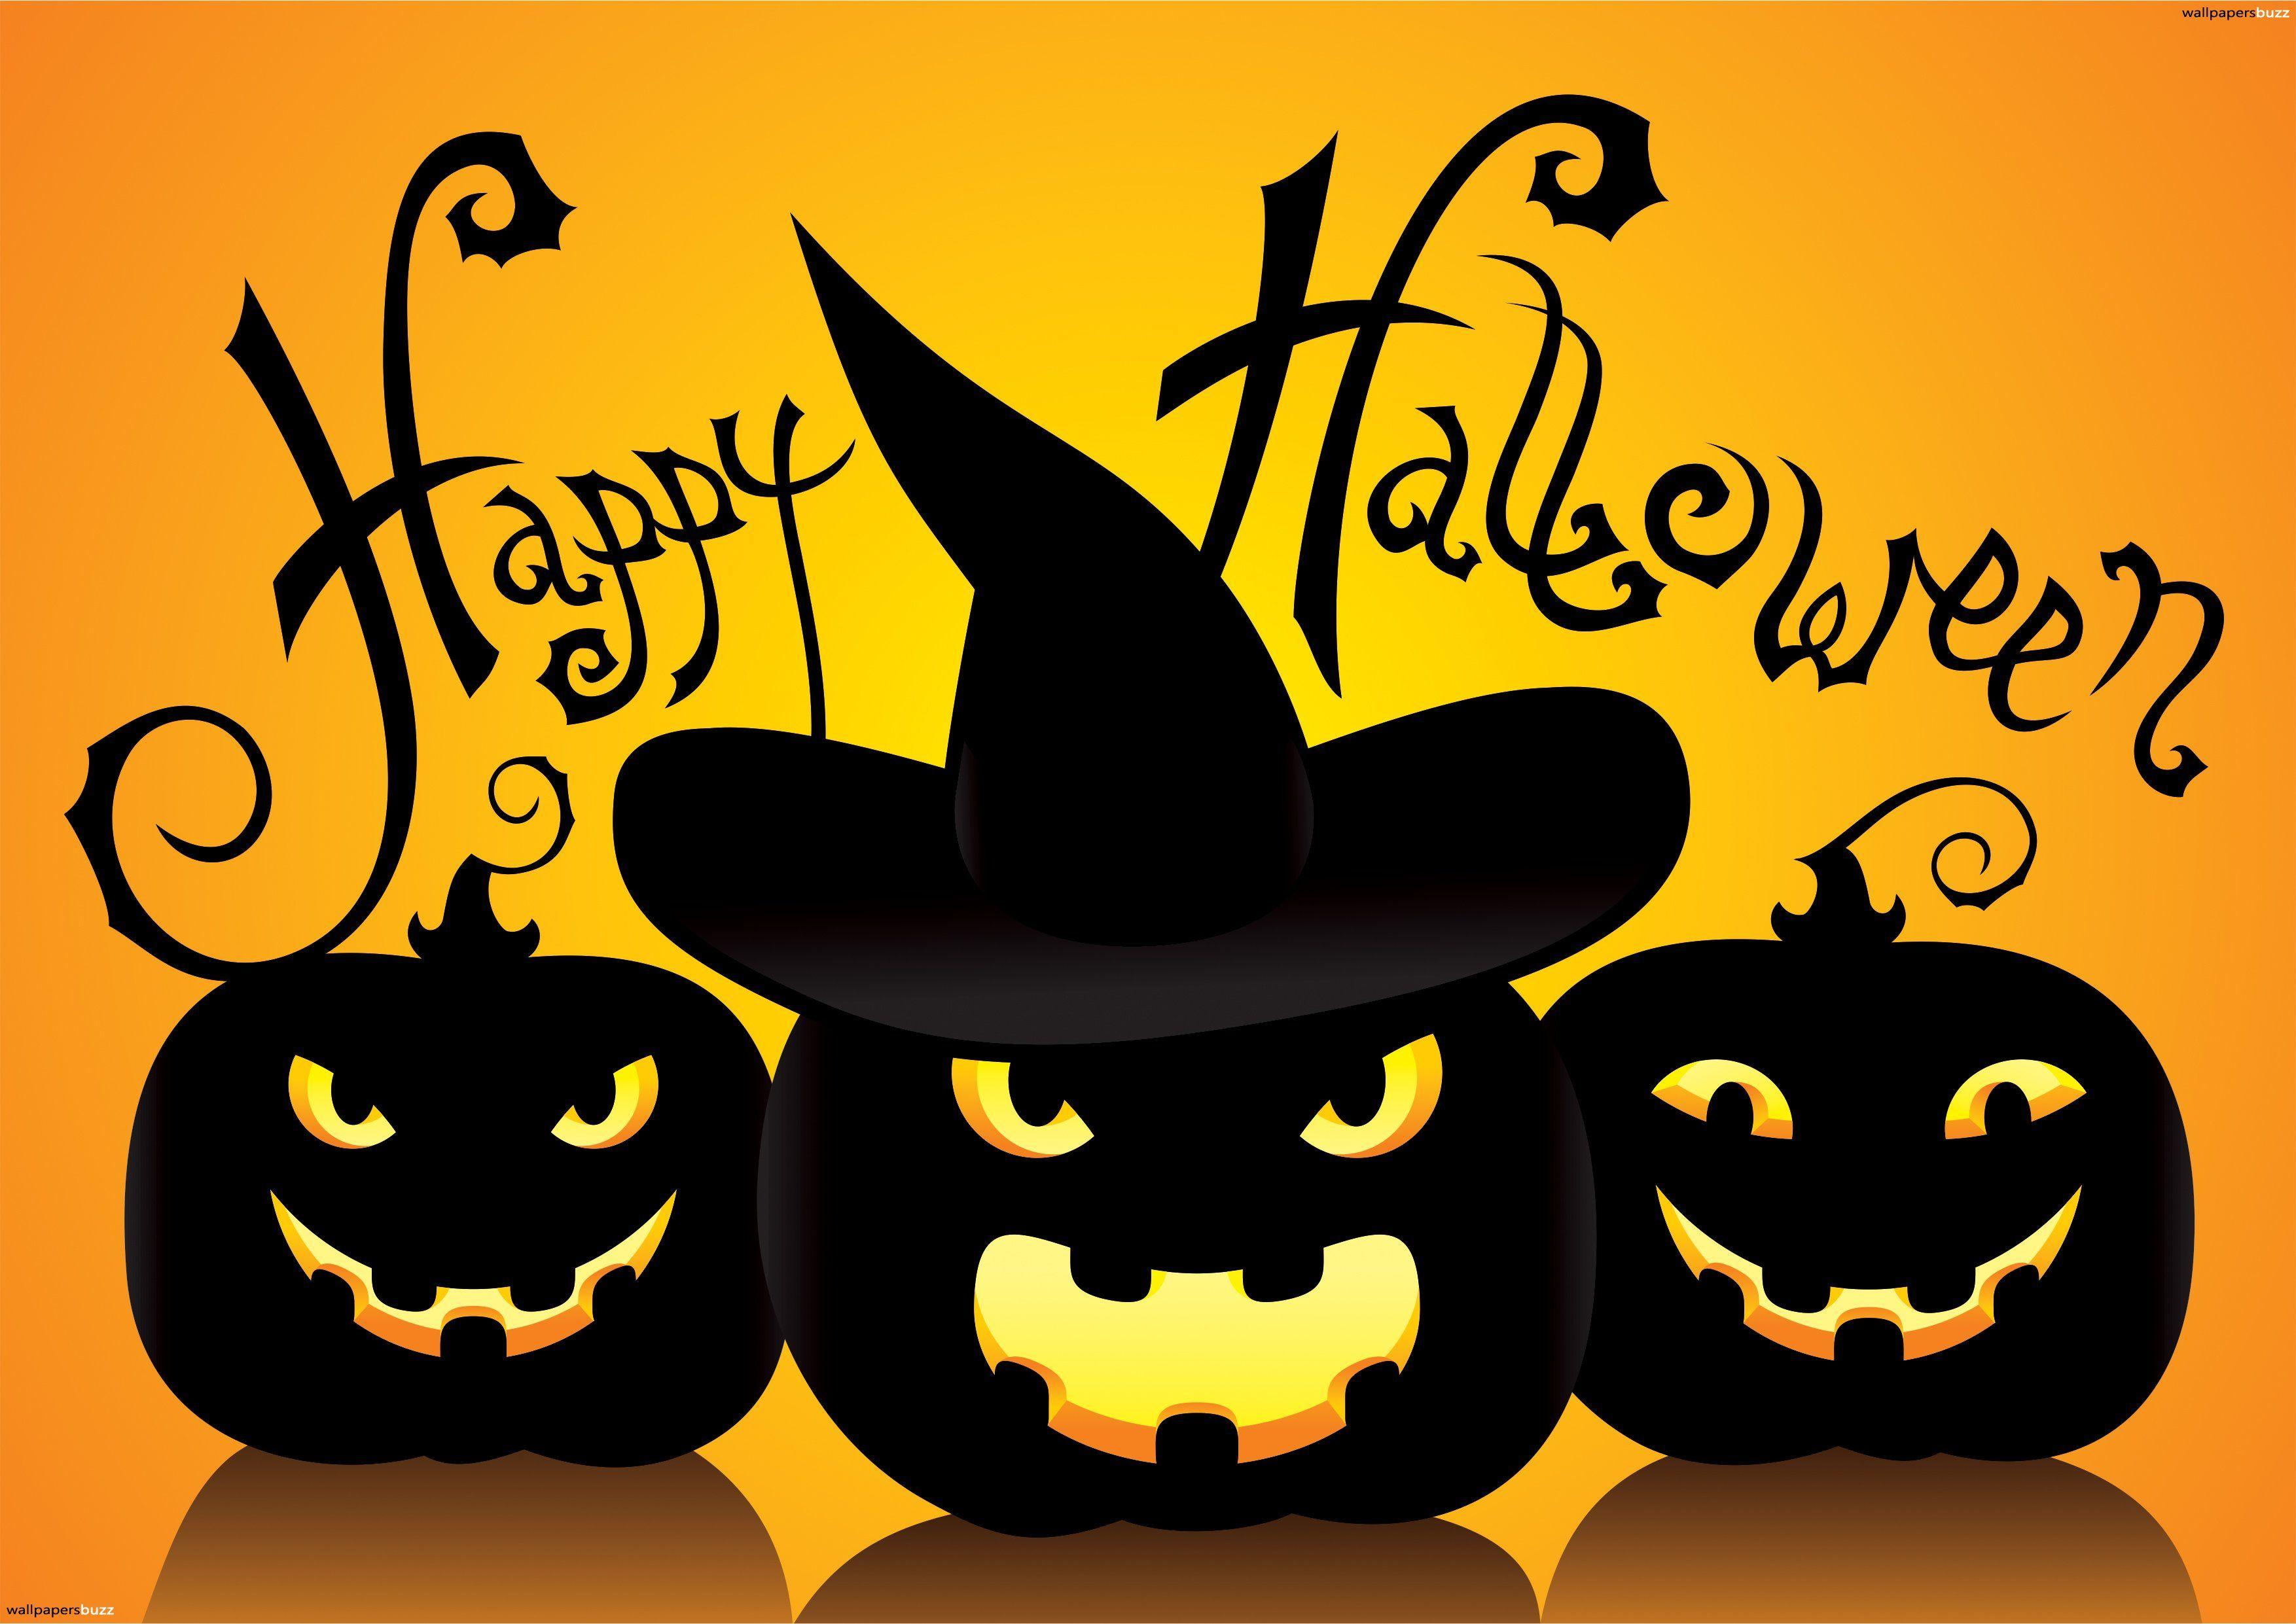 Happy Halloween 2018 Image, Quotes, Wishes, Picture